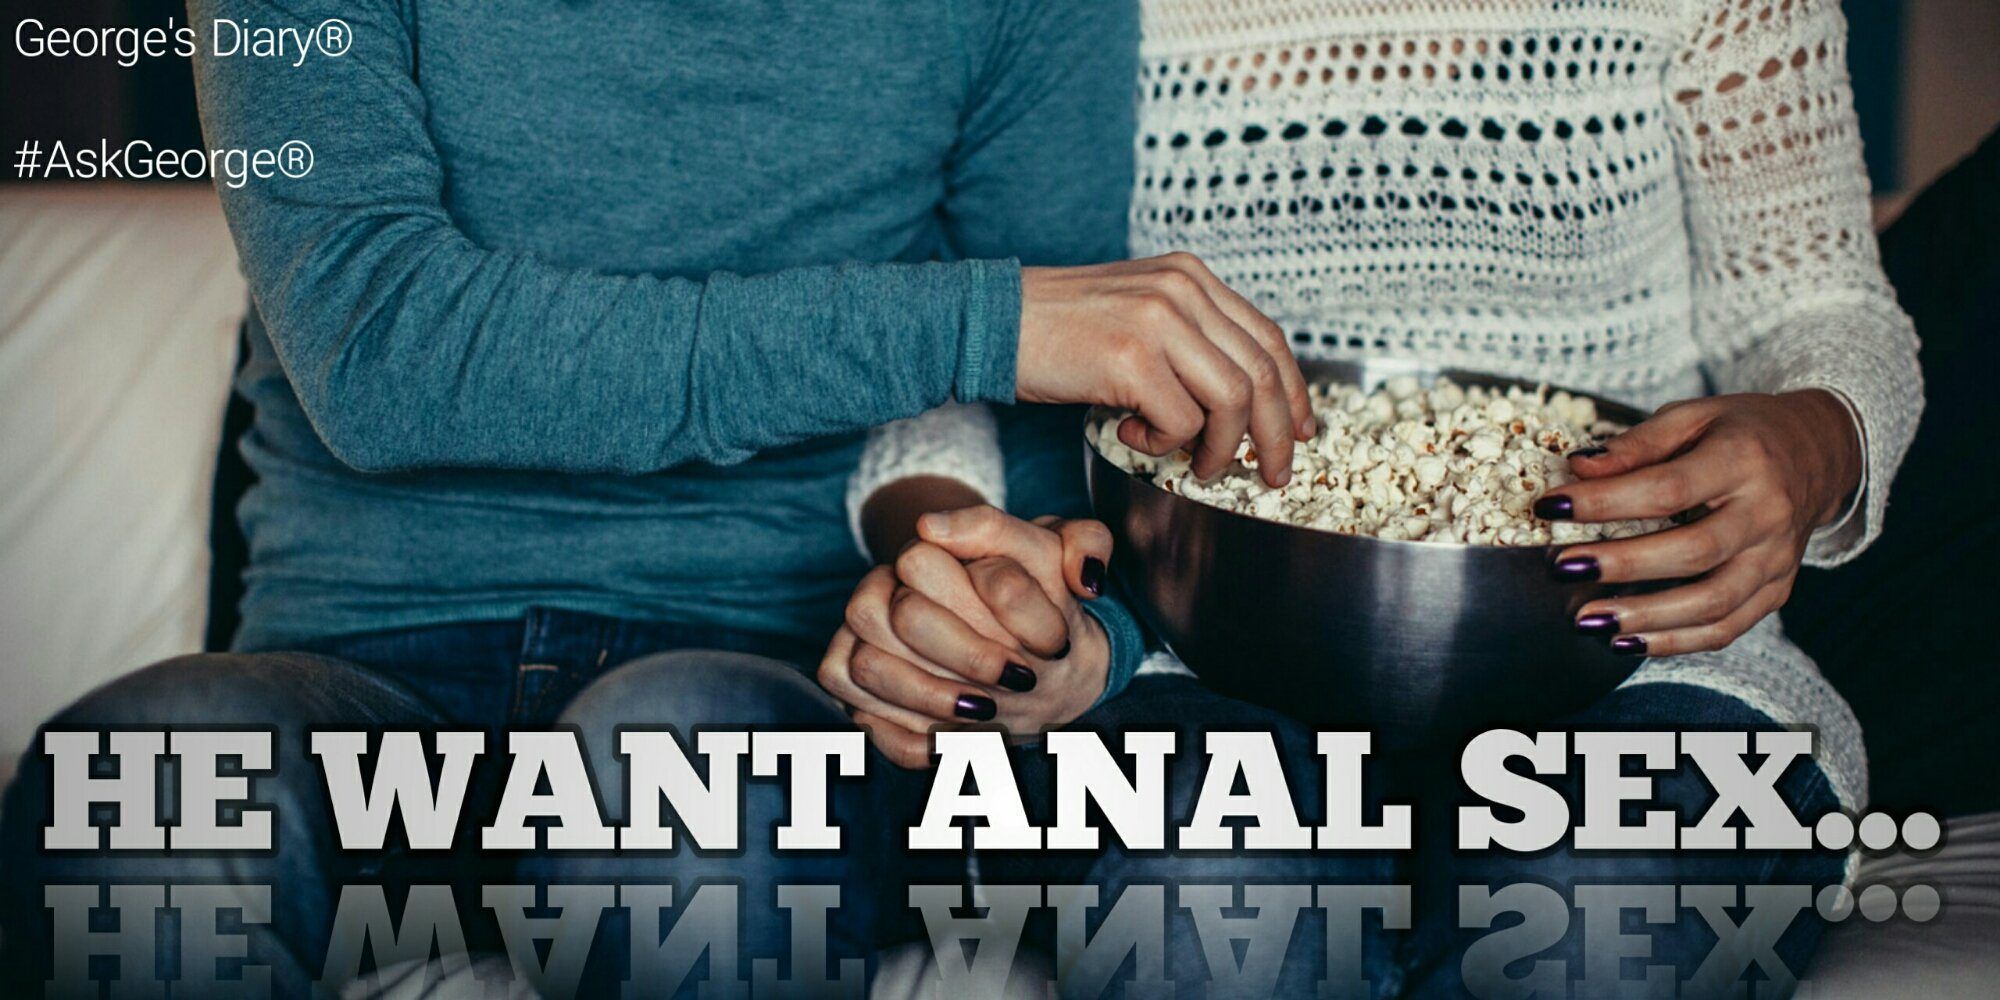 best of Does sex say anal bible What about the